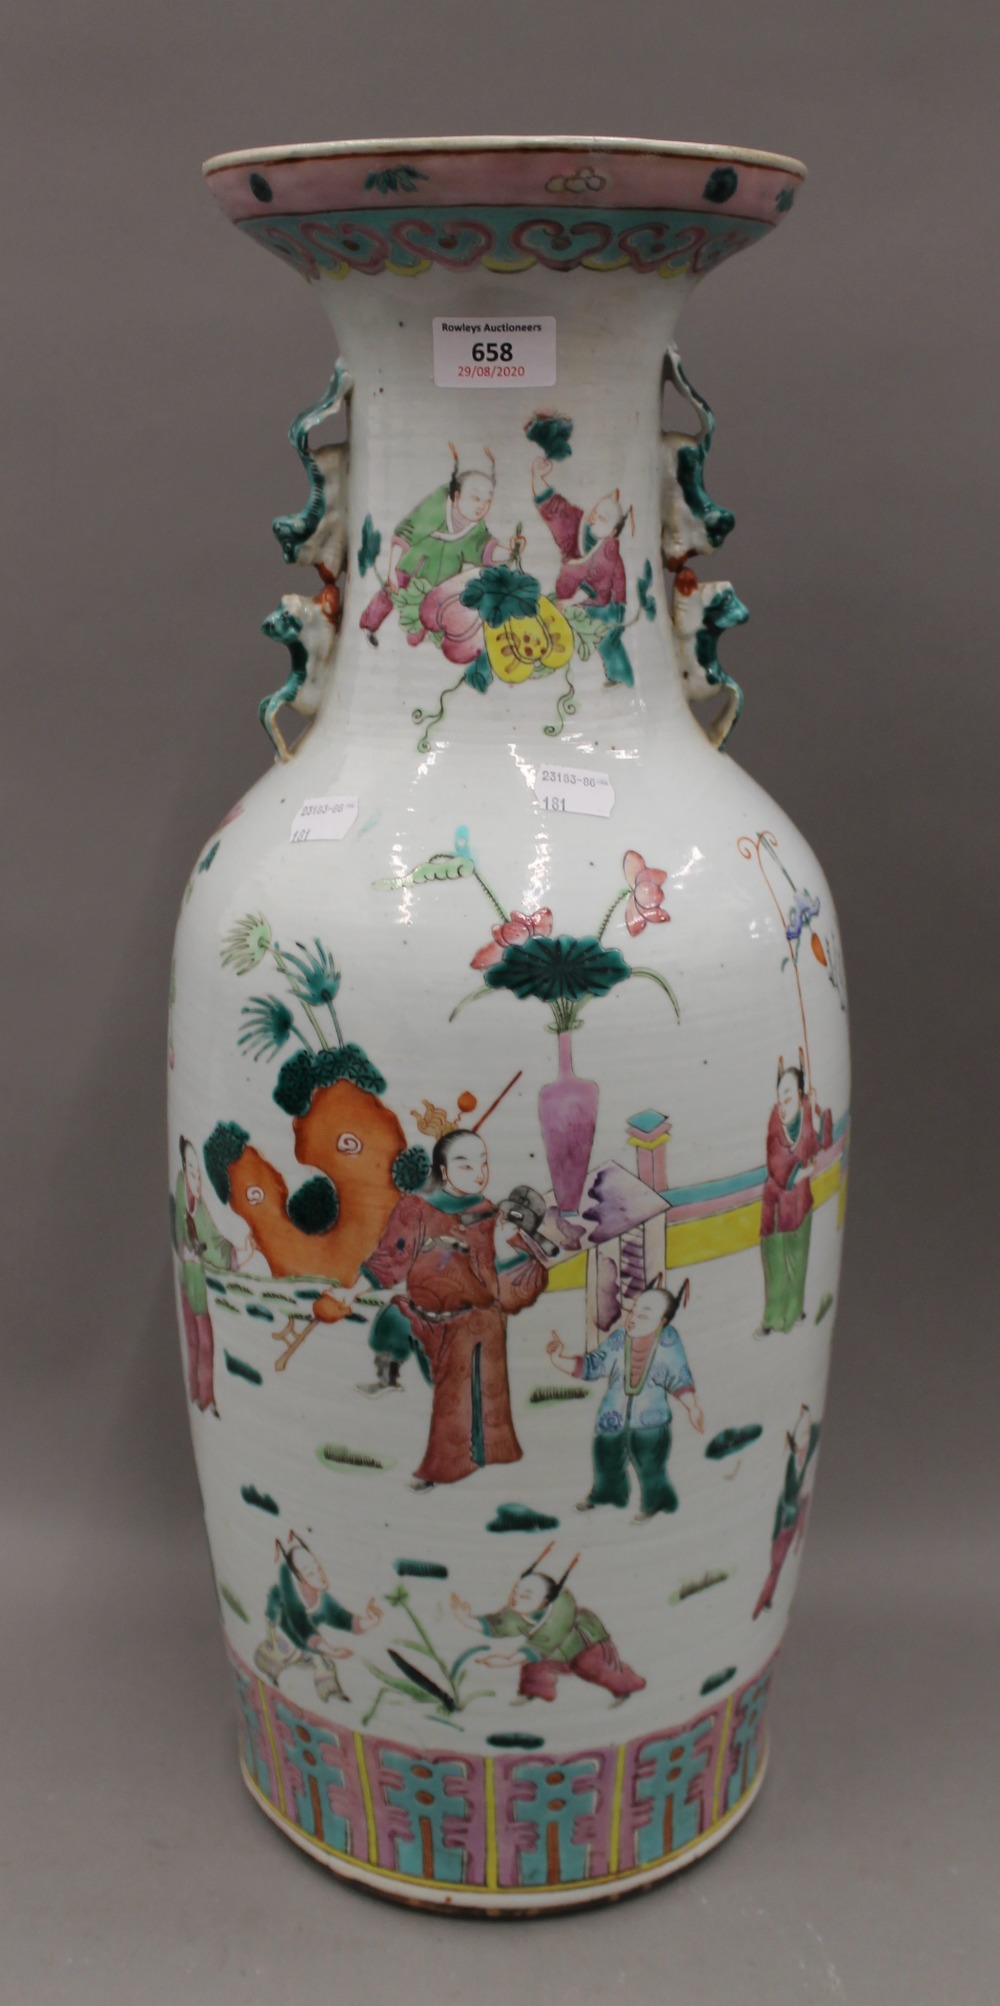 A large 19th century Chinese famille rose vase decorated with figures in various pursuits. 59.